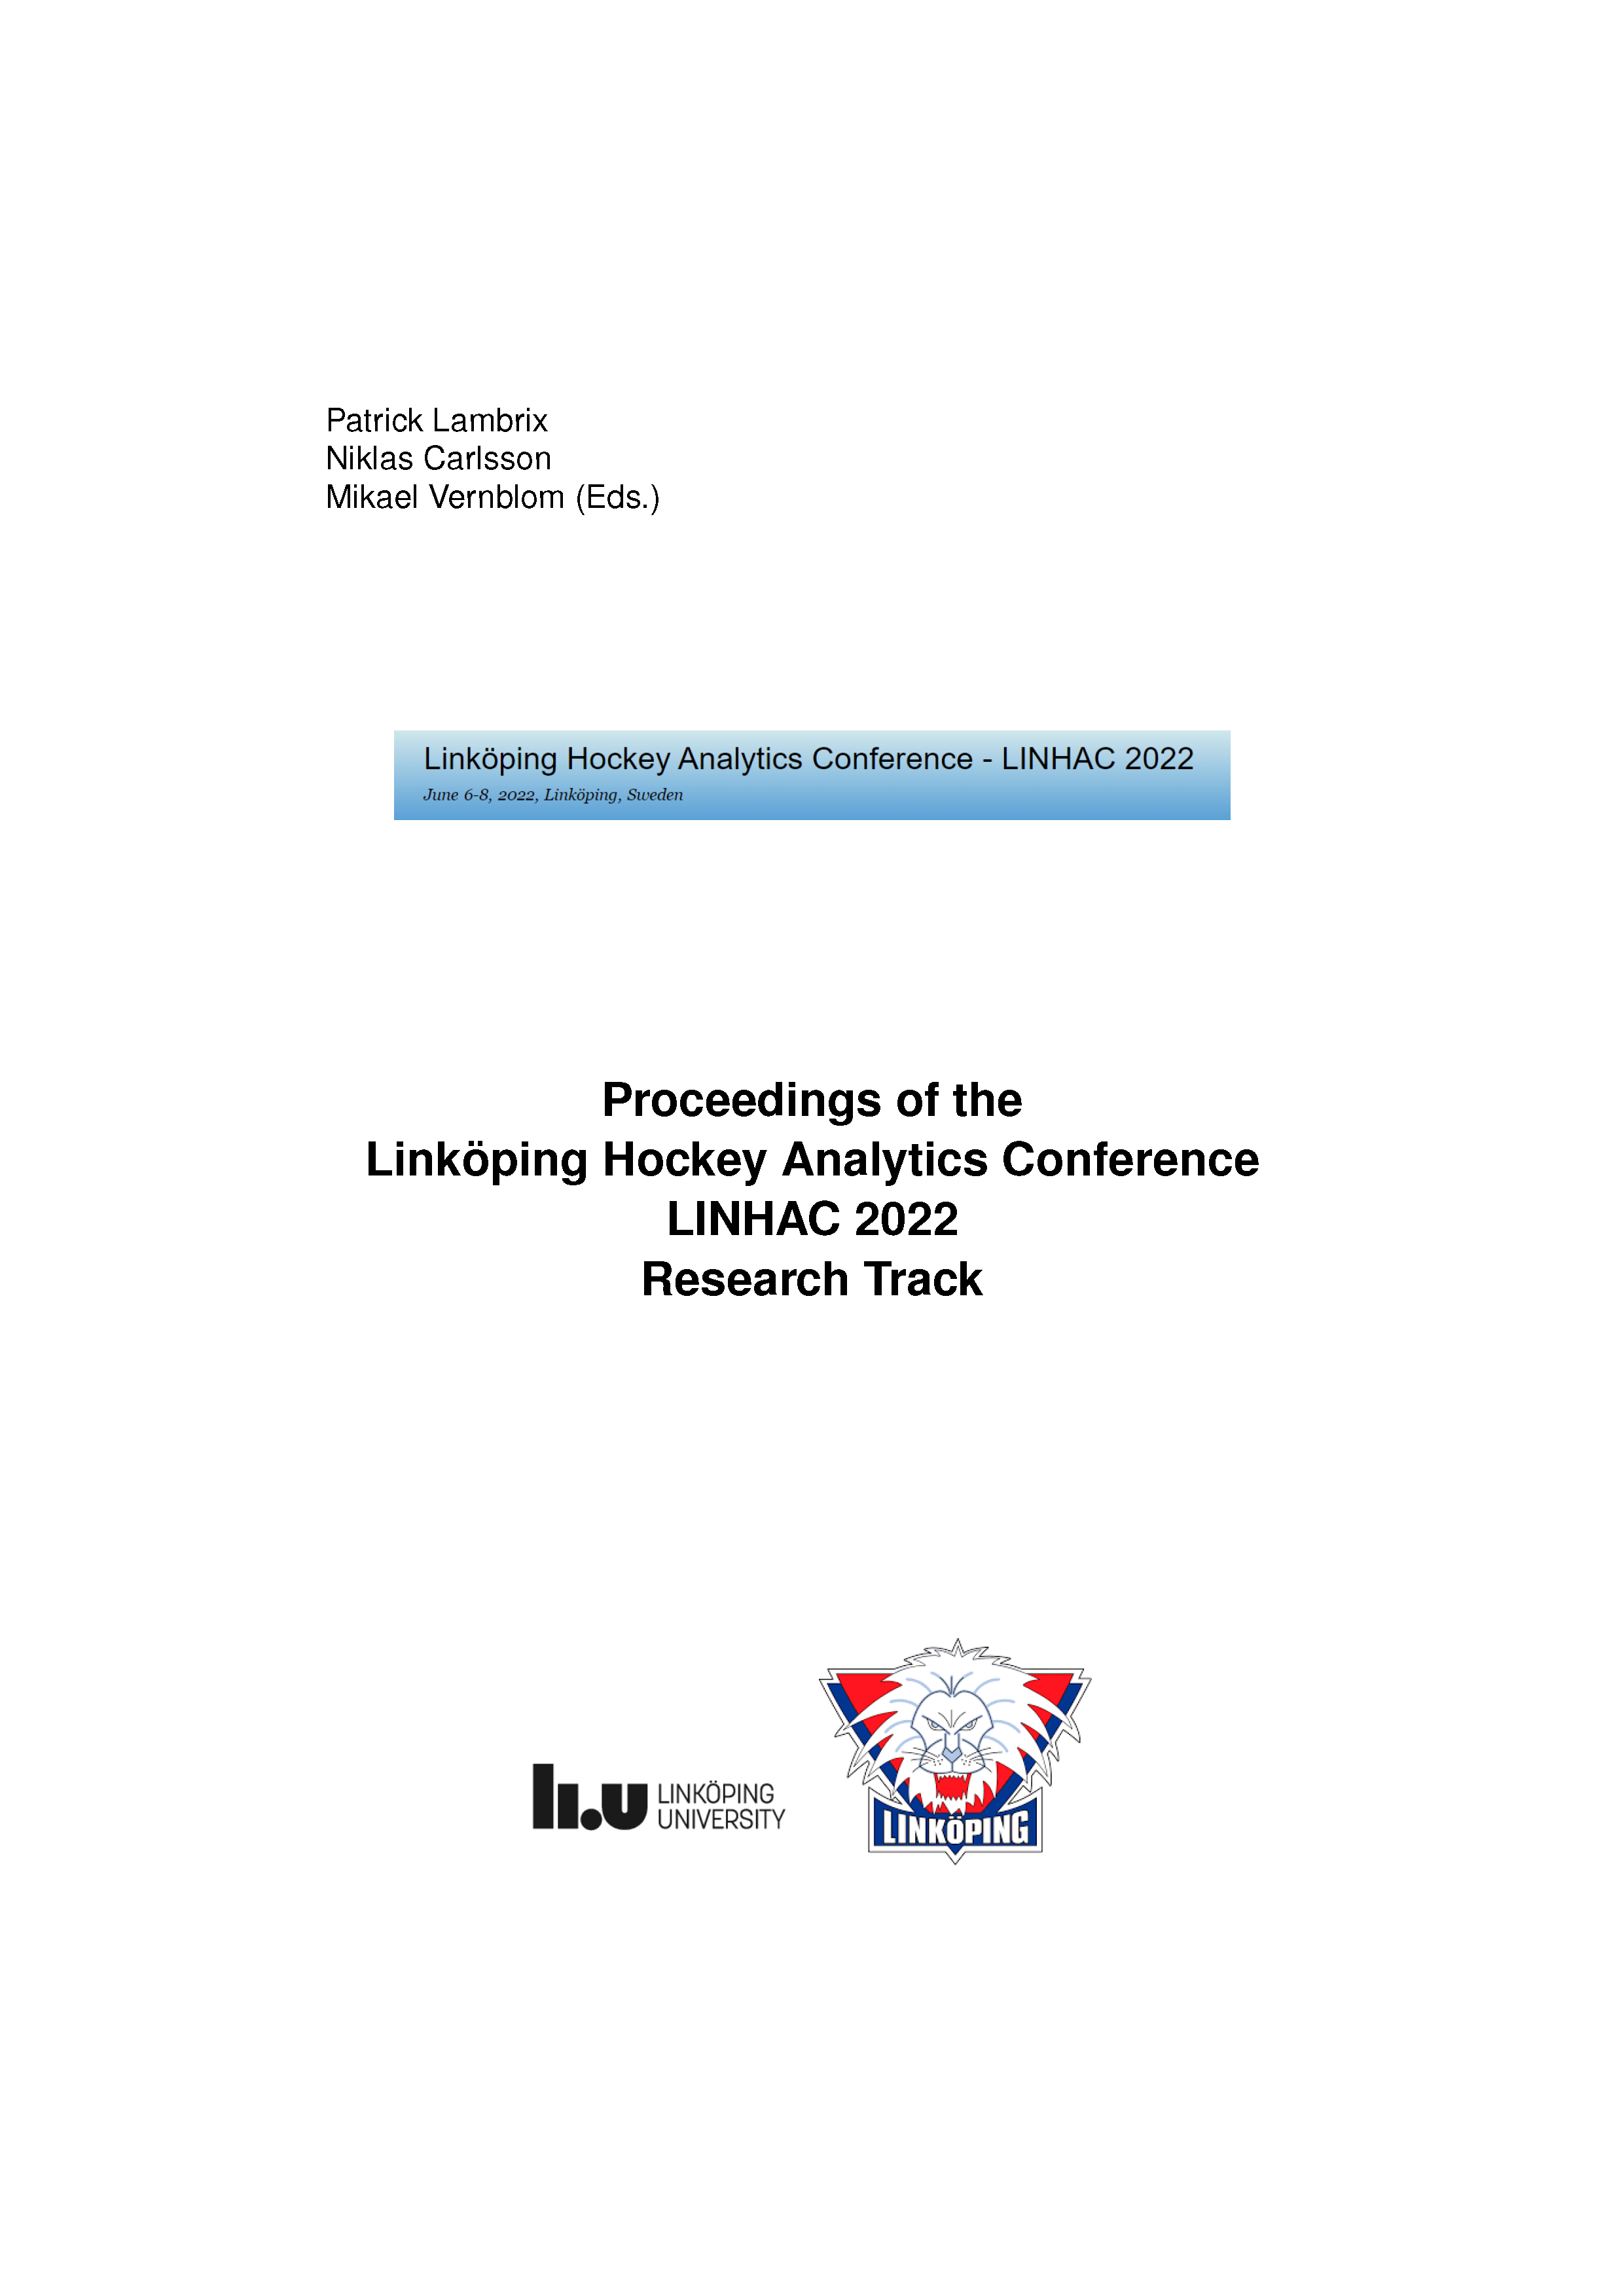 					View Proceedings of the Linköping Hockey Analytics Conference LINHAC 2022 Research Track
				